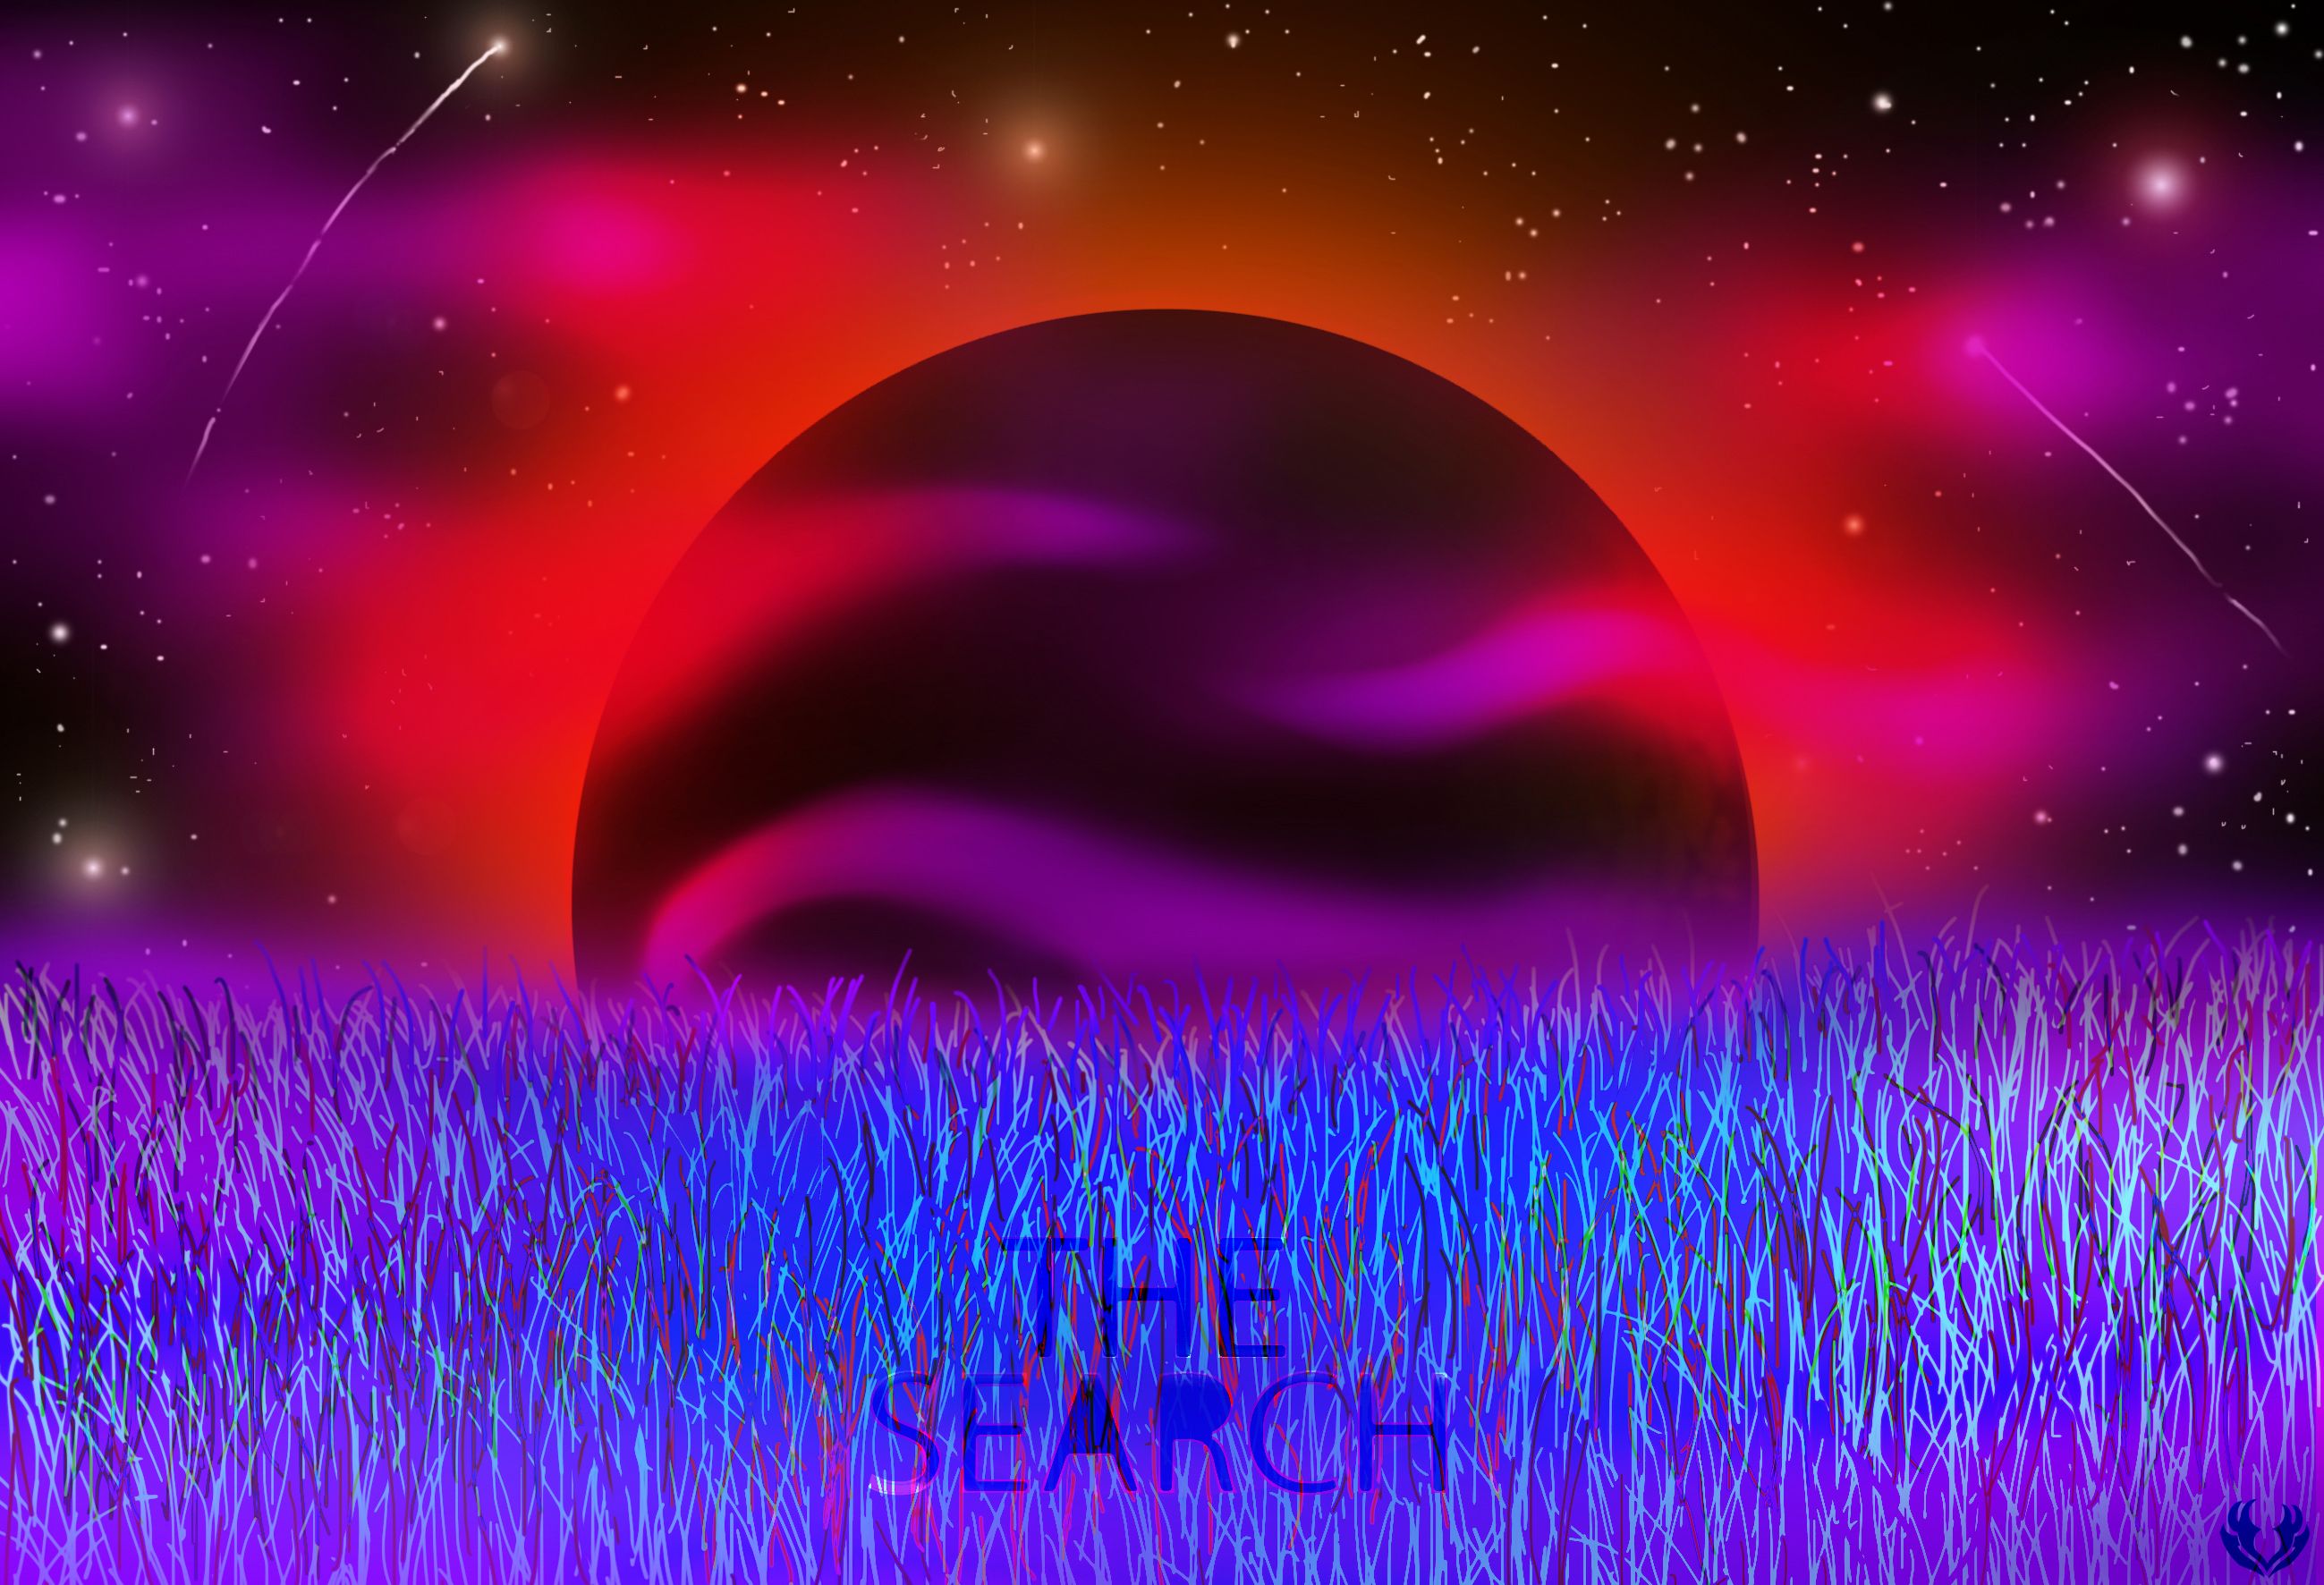 THE SEARCH_edited-1.jpg